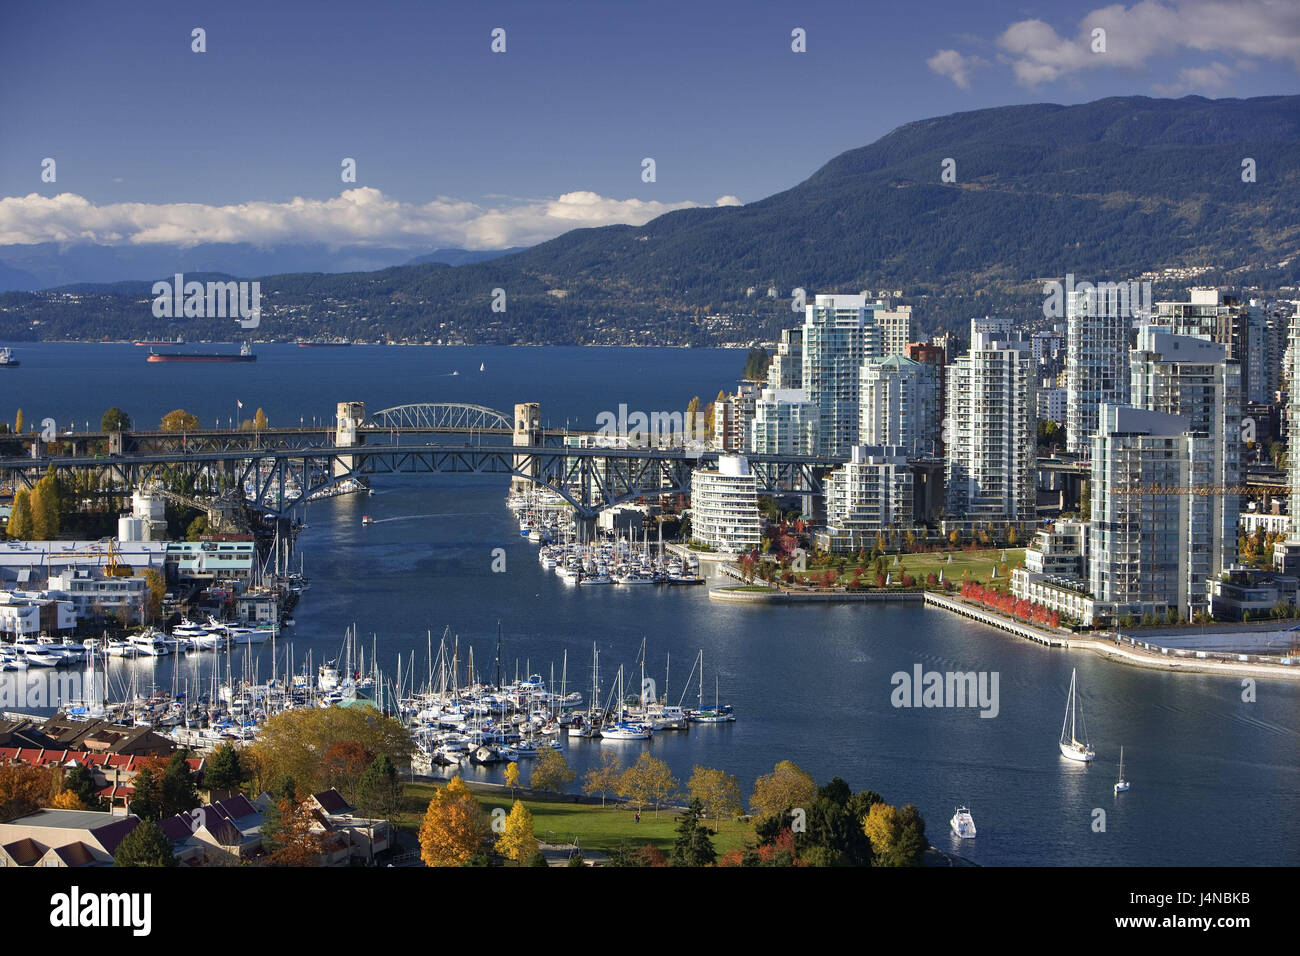 Canada, British Columbia, Vancouver, False Creek, centre of the city, town view, North America, British Colombia, town, harbour, port, high rises, buildings, architecture, bridge, water, ship, boats, view, Stock Photo